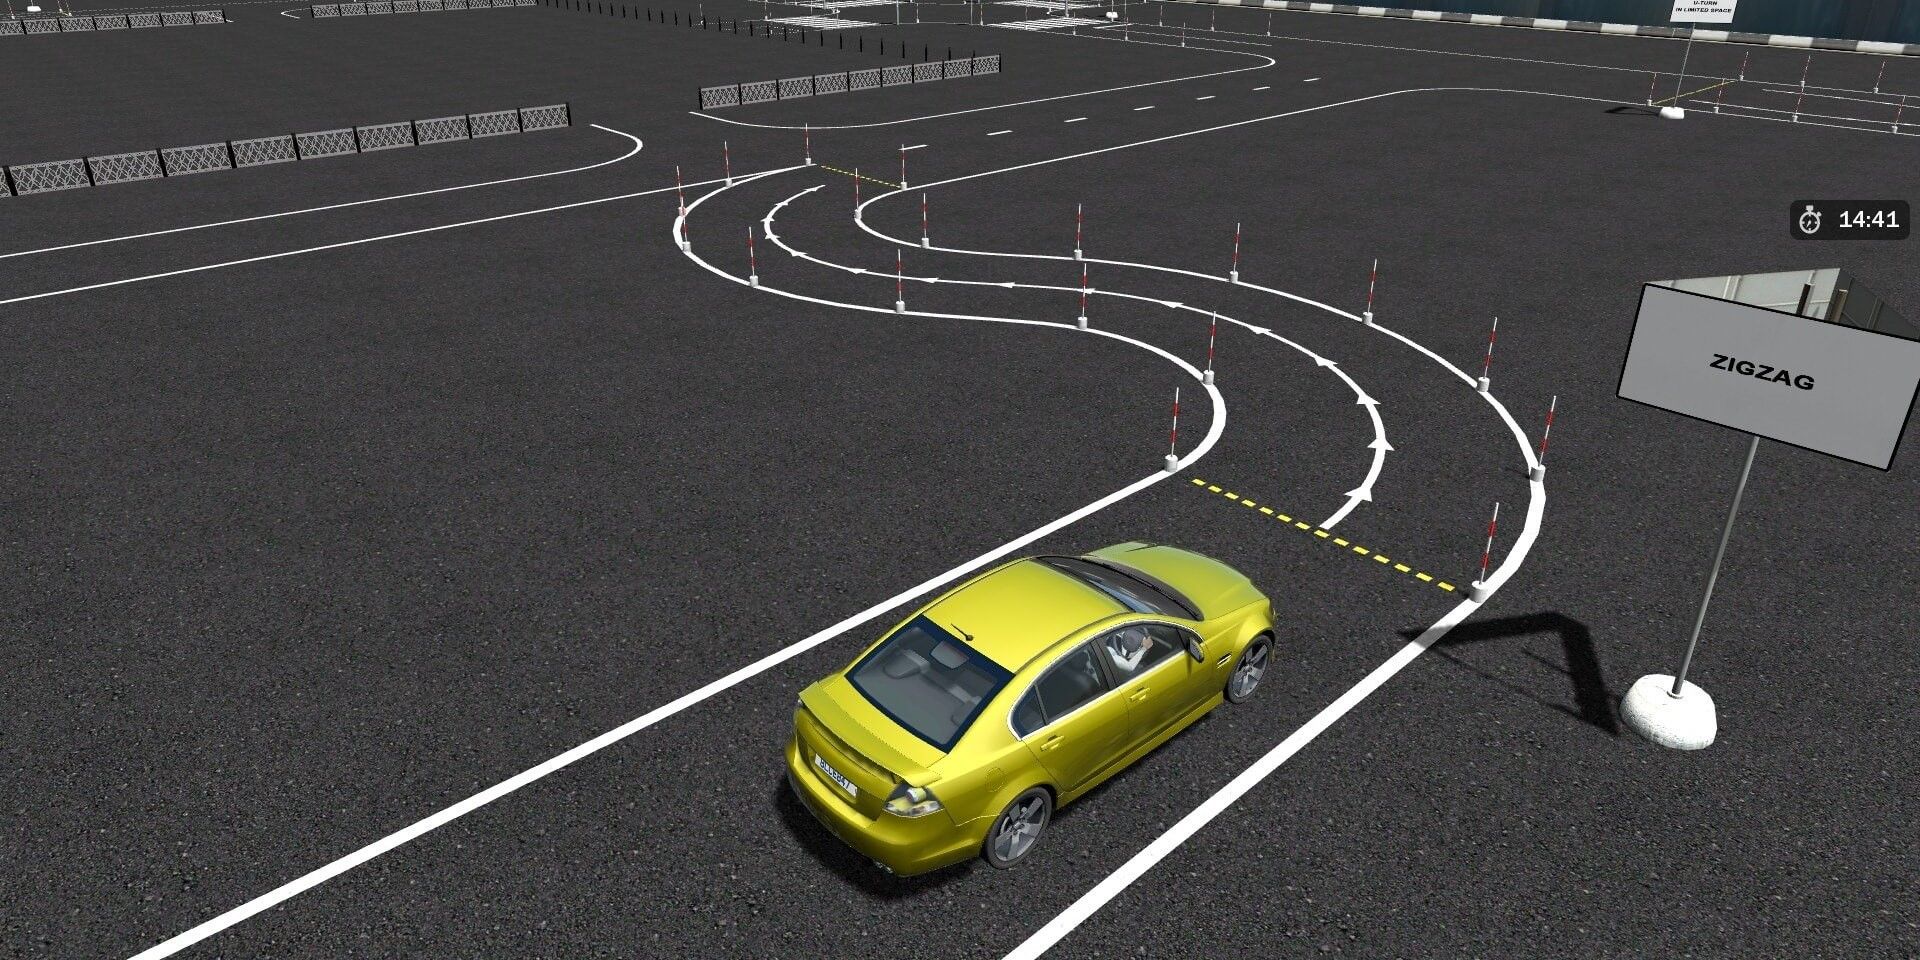 City Car Driving ZigZag practice course yellow car on course